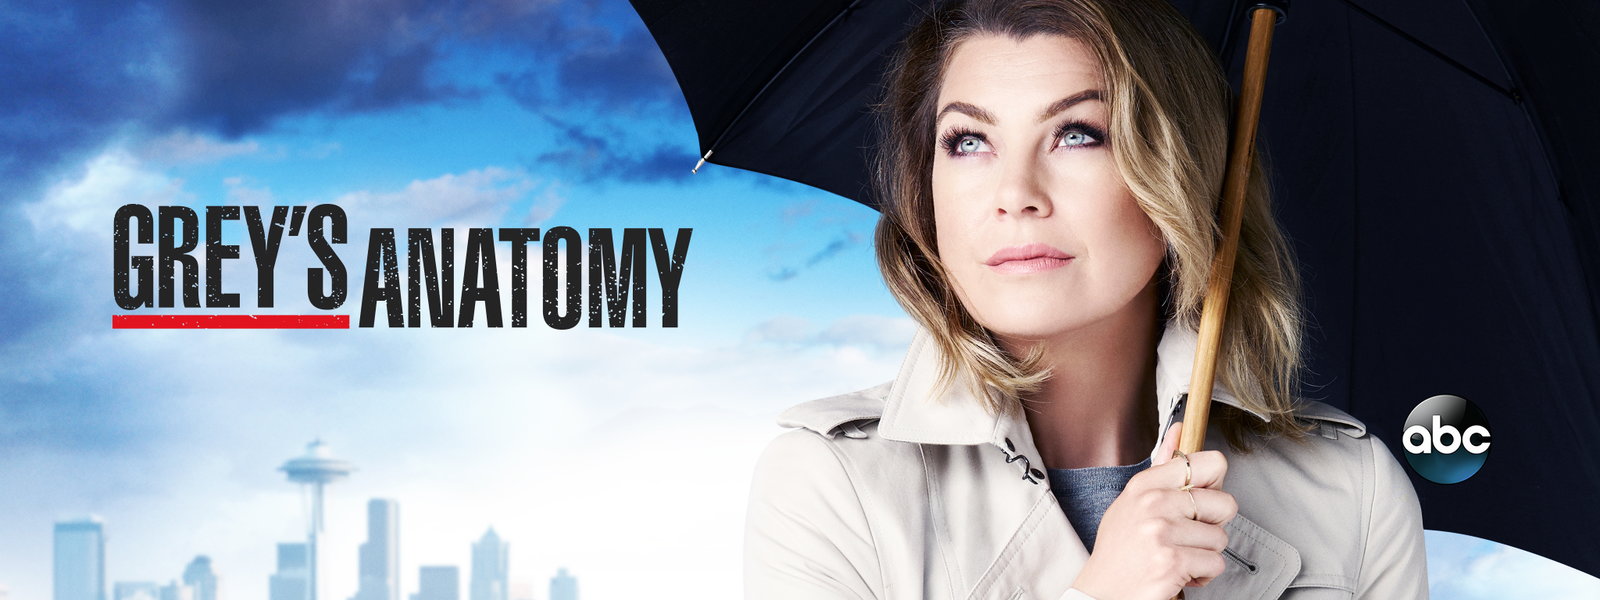 HQ Grey's Anatomy Wallpapers | File 141.99Kb